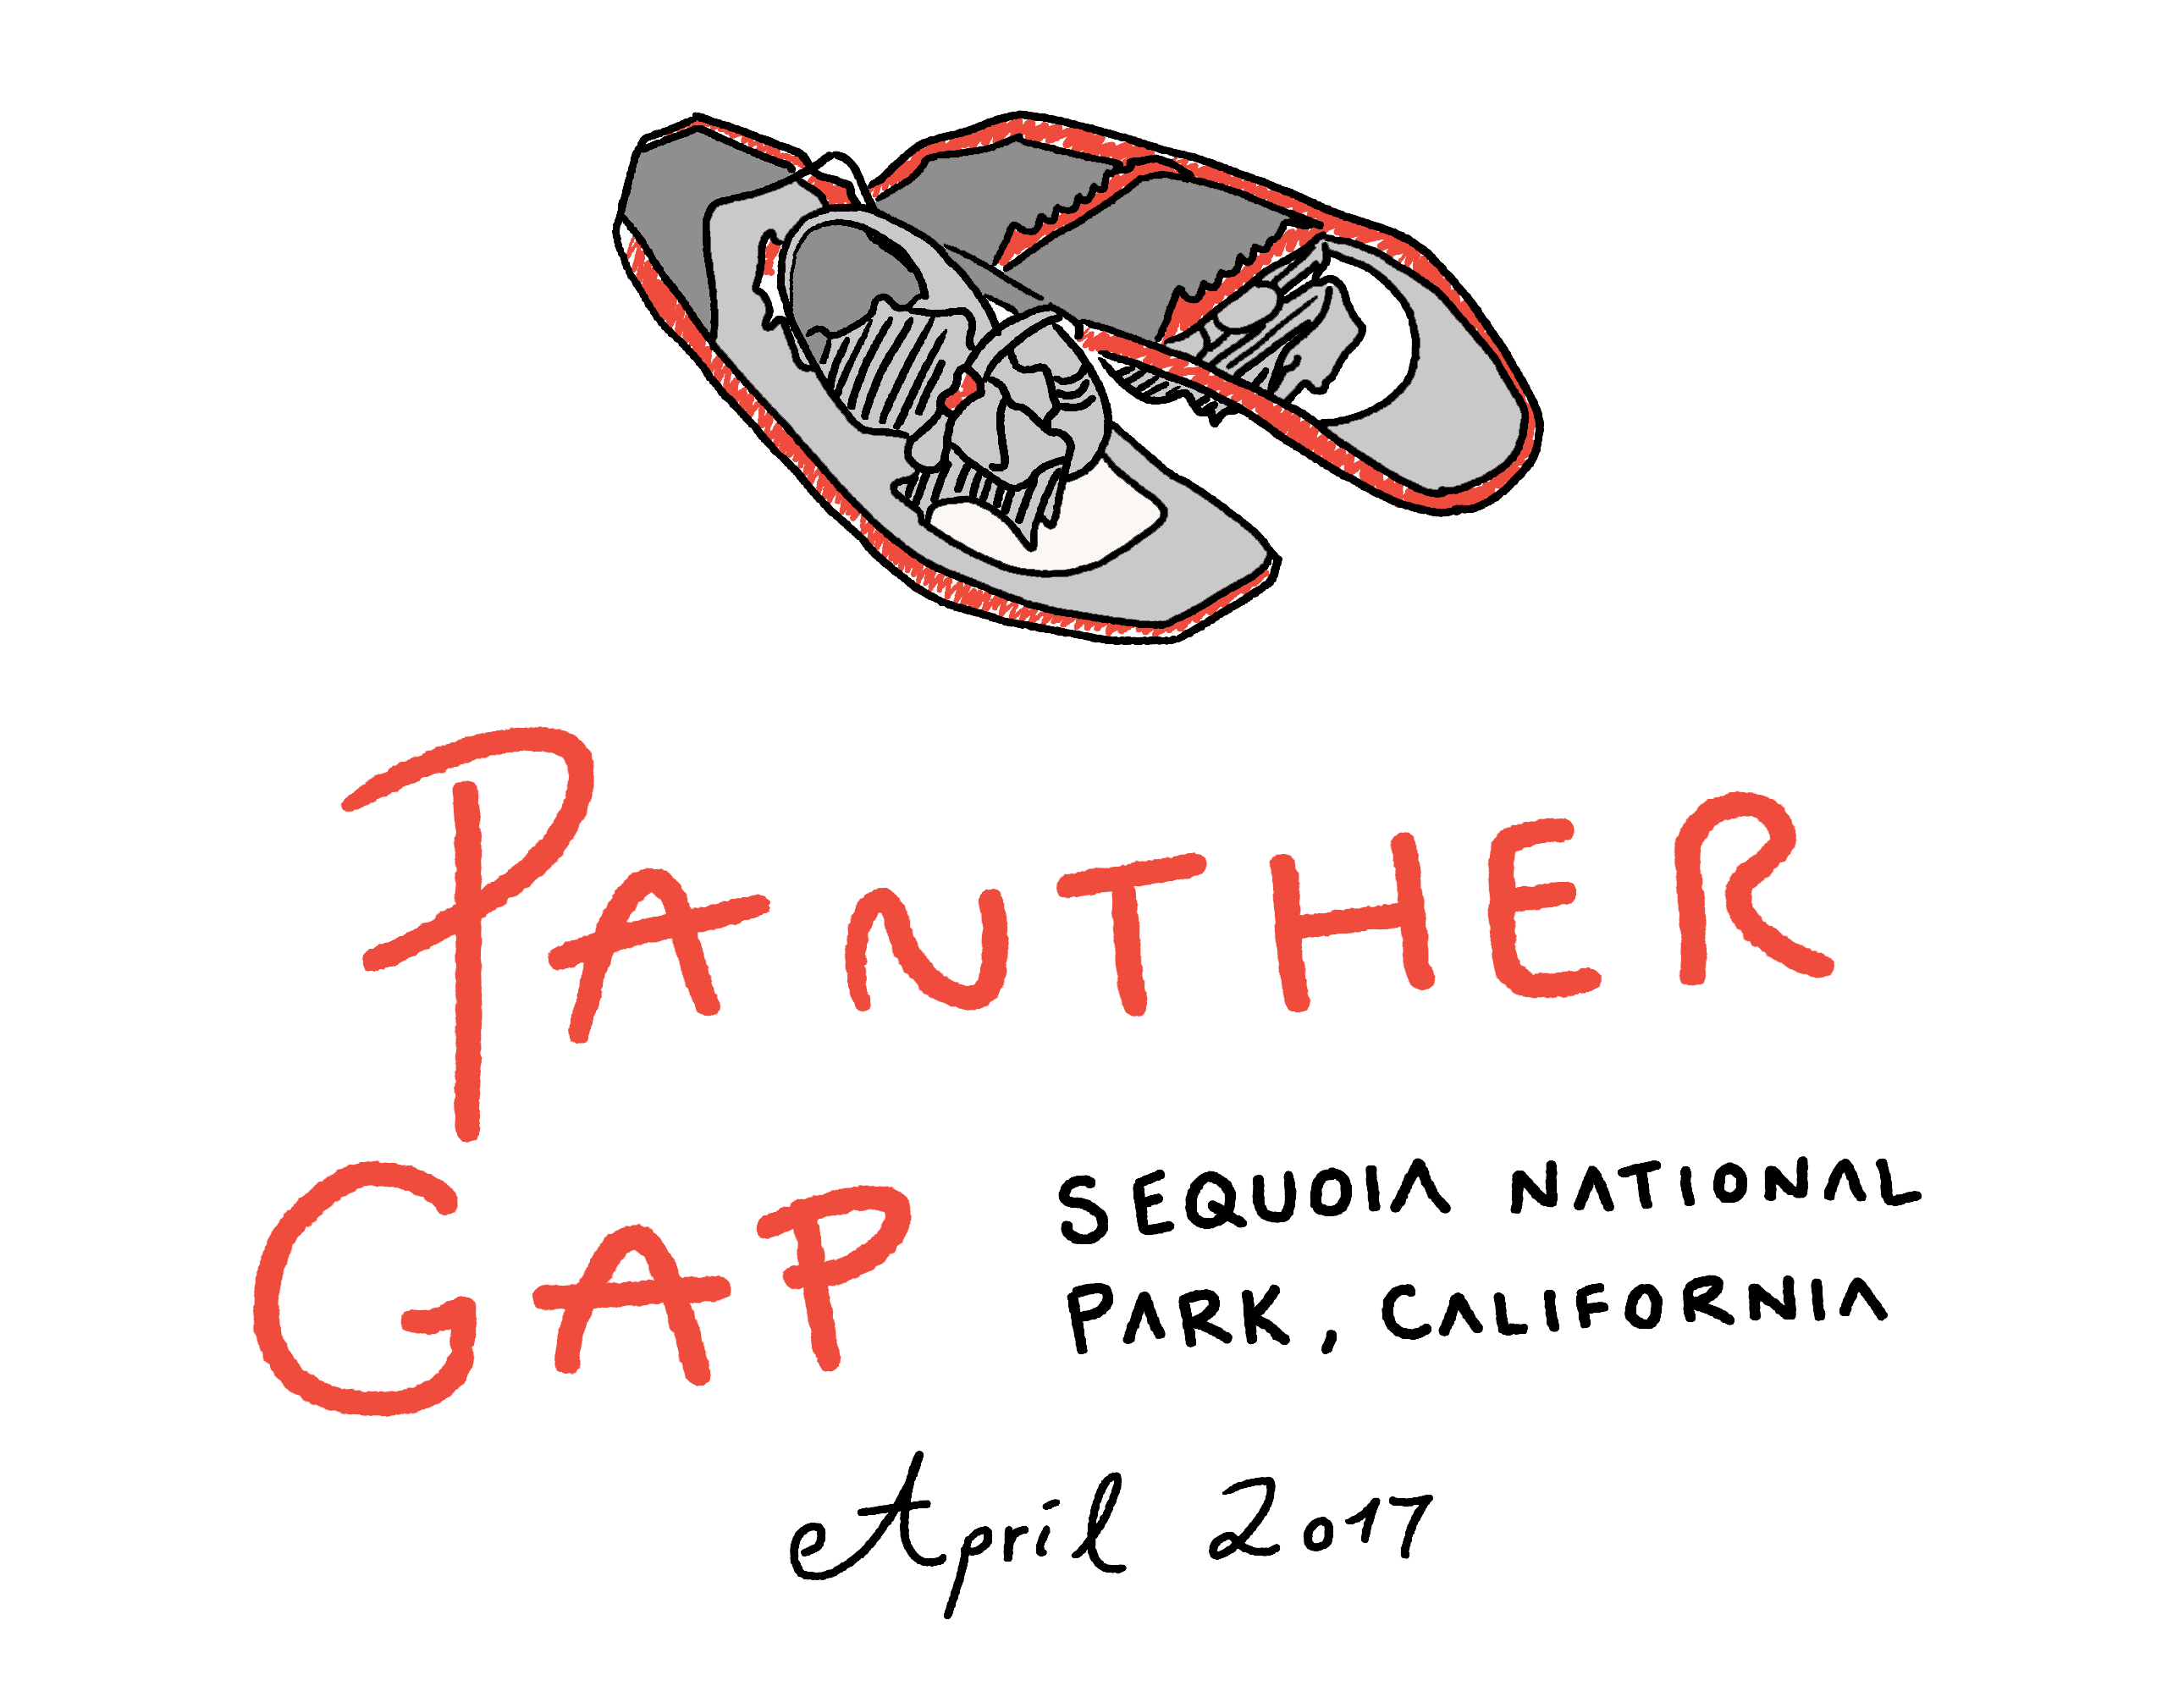 Panther Gap winter backpacking story doodle